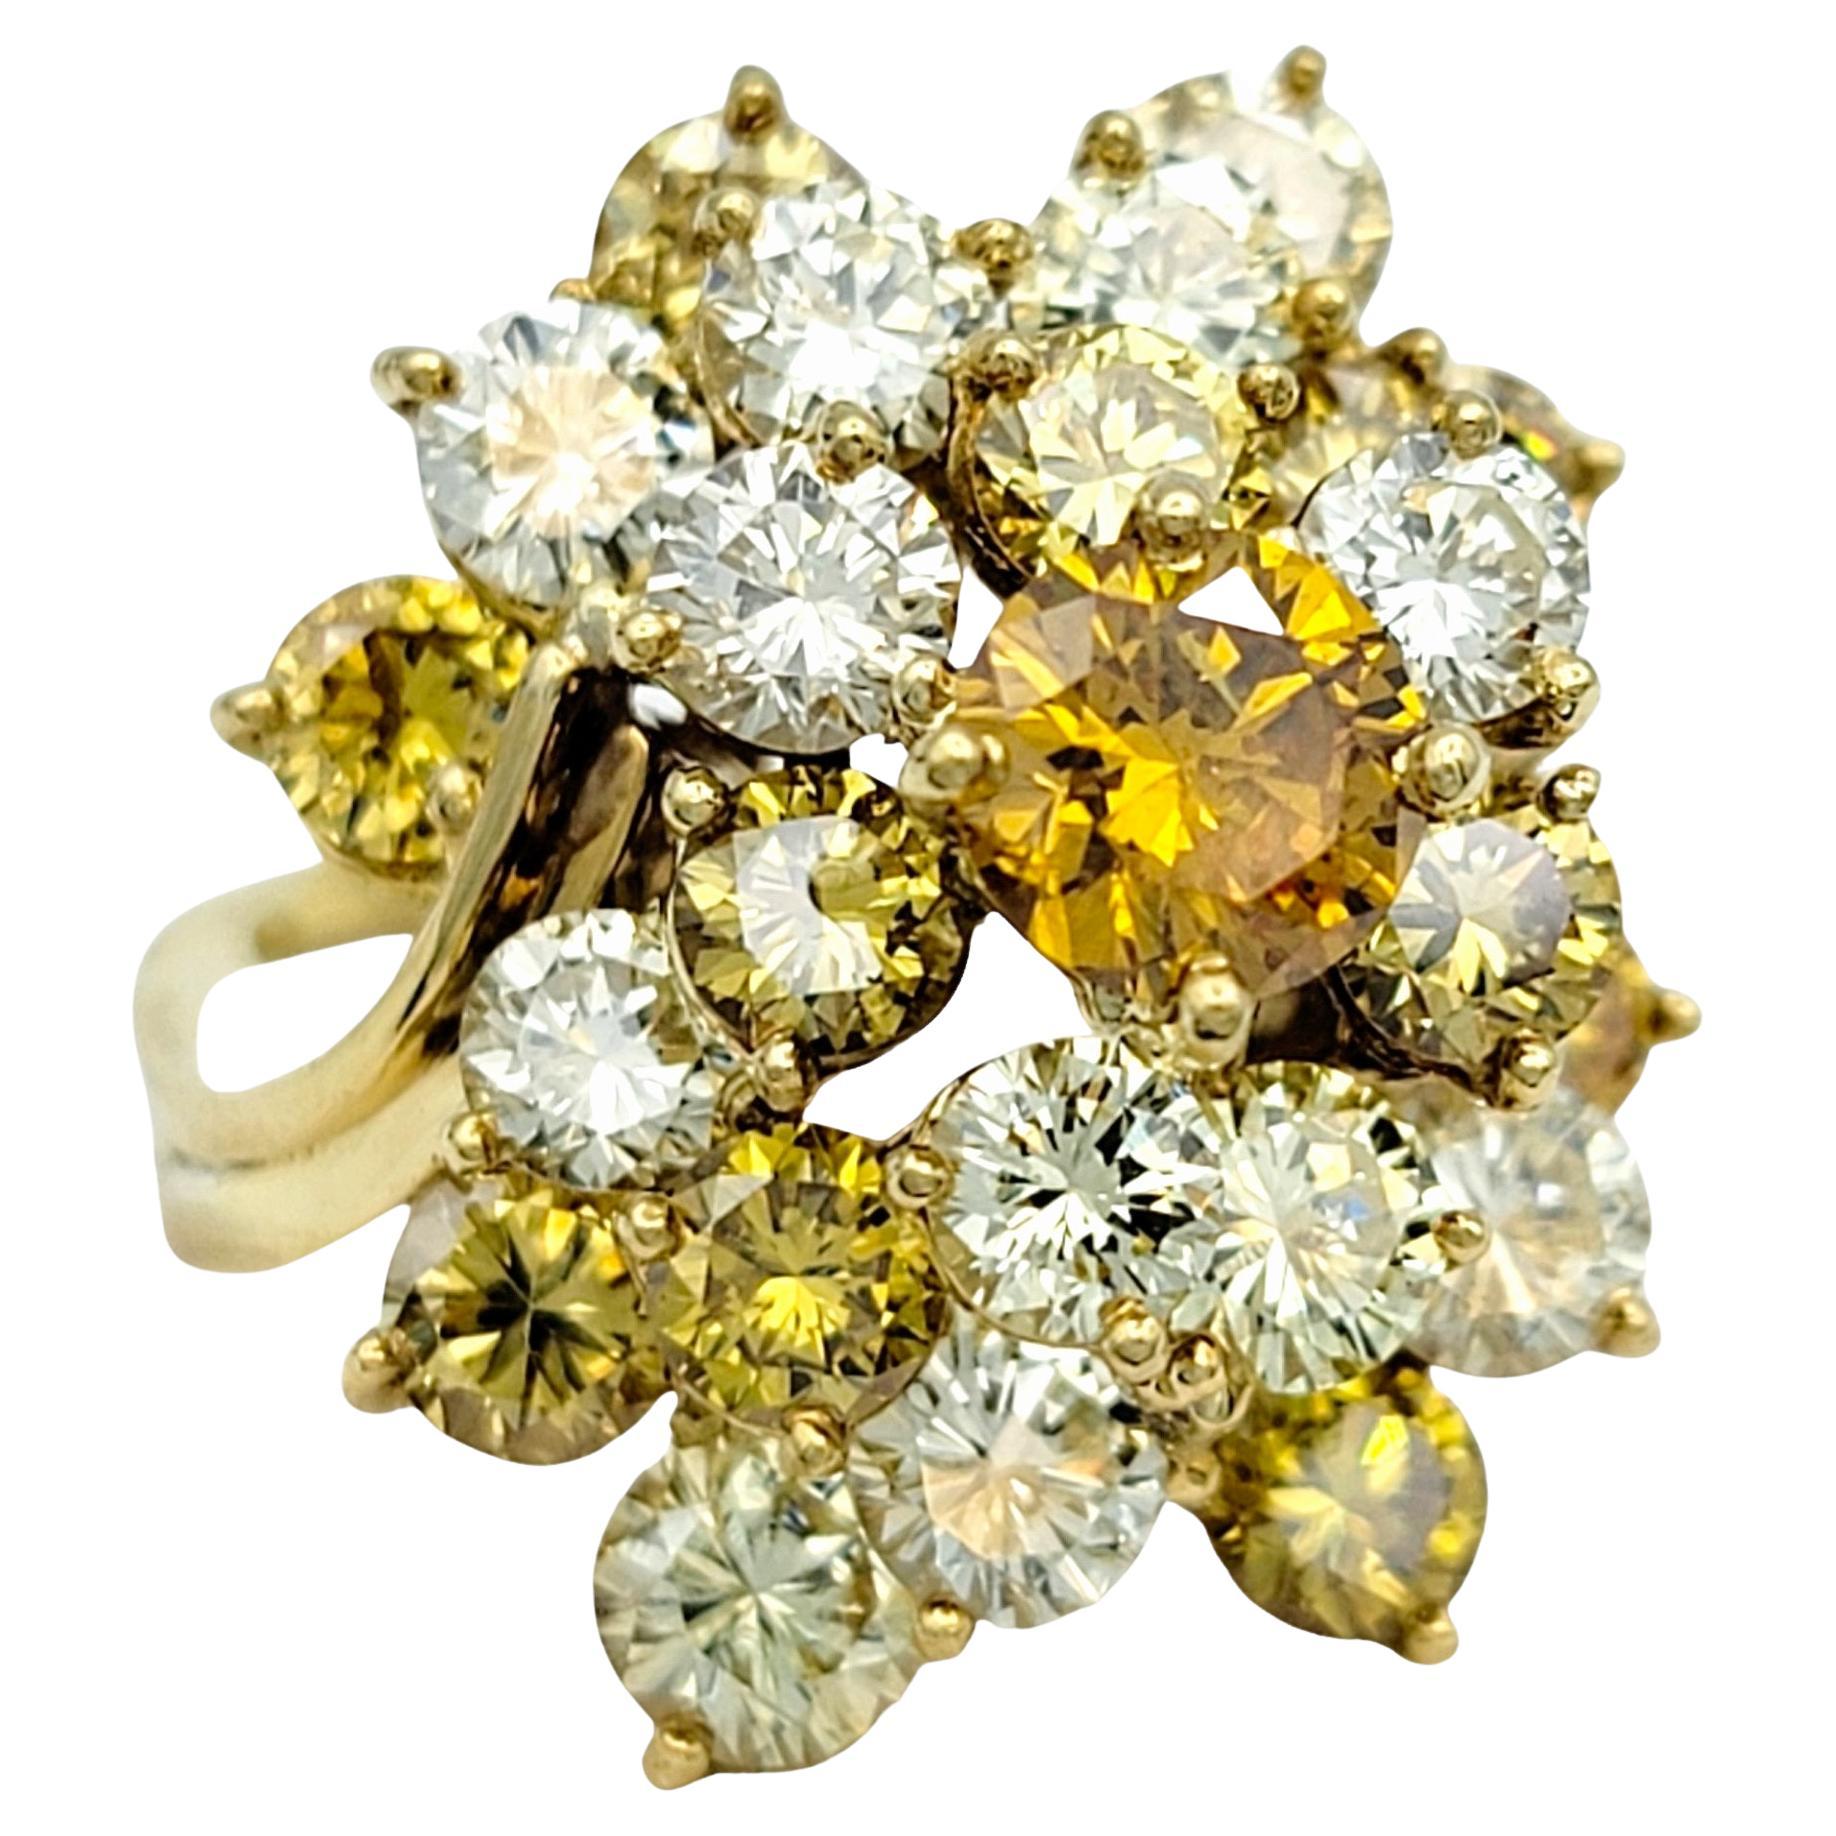 Ring Size: 6

This stunning vintage diamond cocktail ring, set in luxurious 18 karat yellow gold is sure to impress. The centerpiece of this exquisite ring is a dazzling Fancy Orange diamond, capturing attention with its rare and captivating hue.